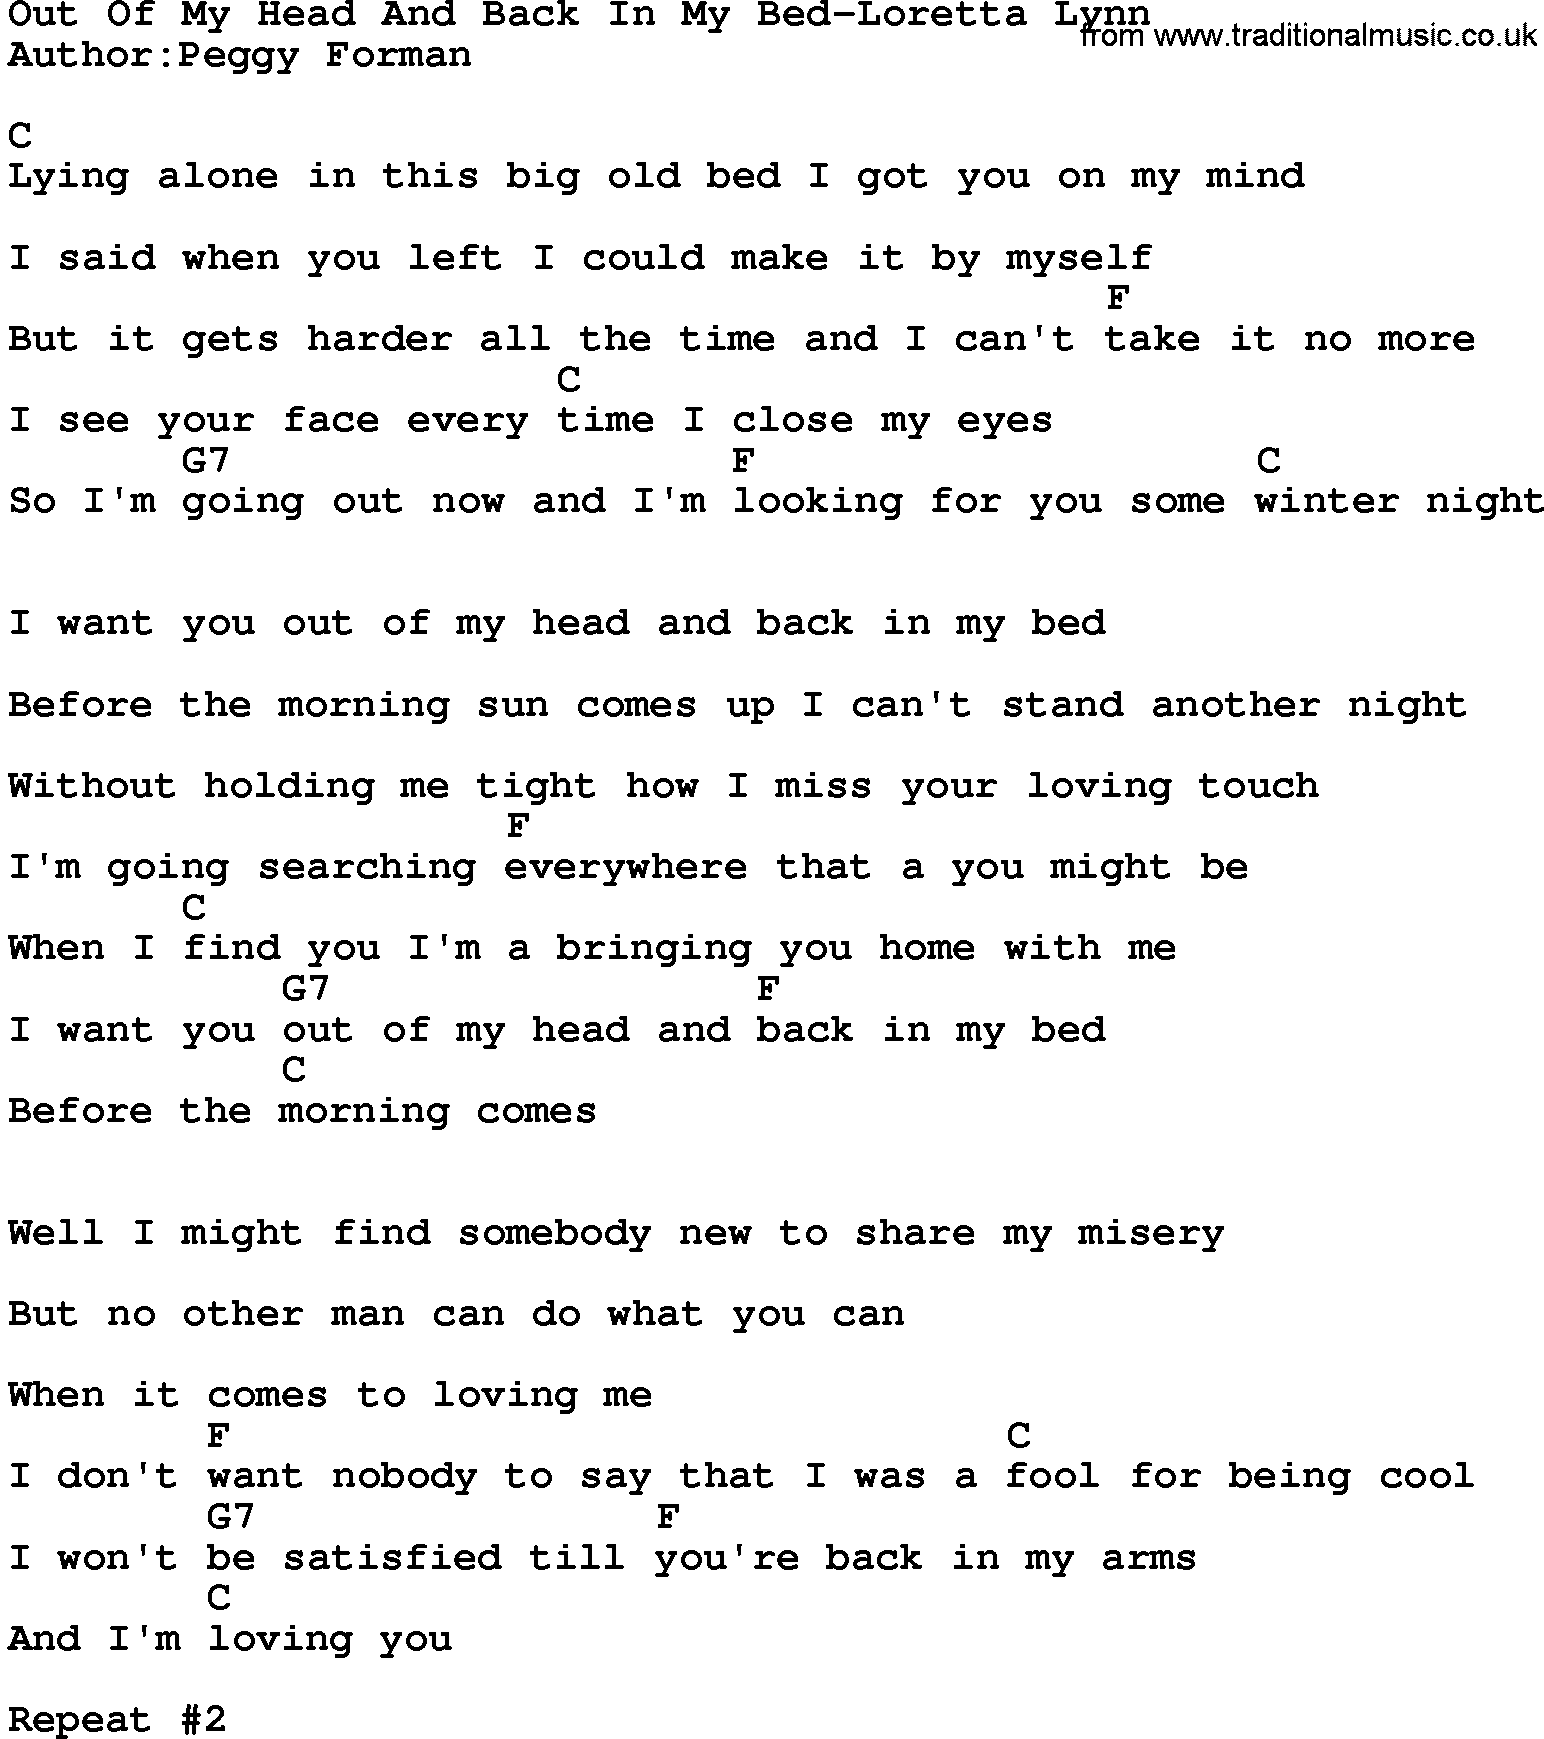 Country music song: Out Of My Head And Back In My Bed-Loretta Lynn lyrics and chords